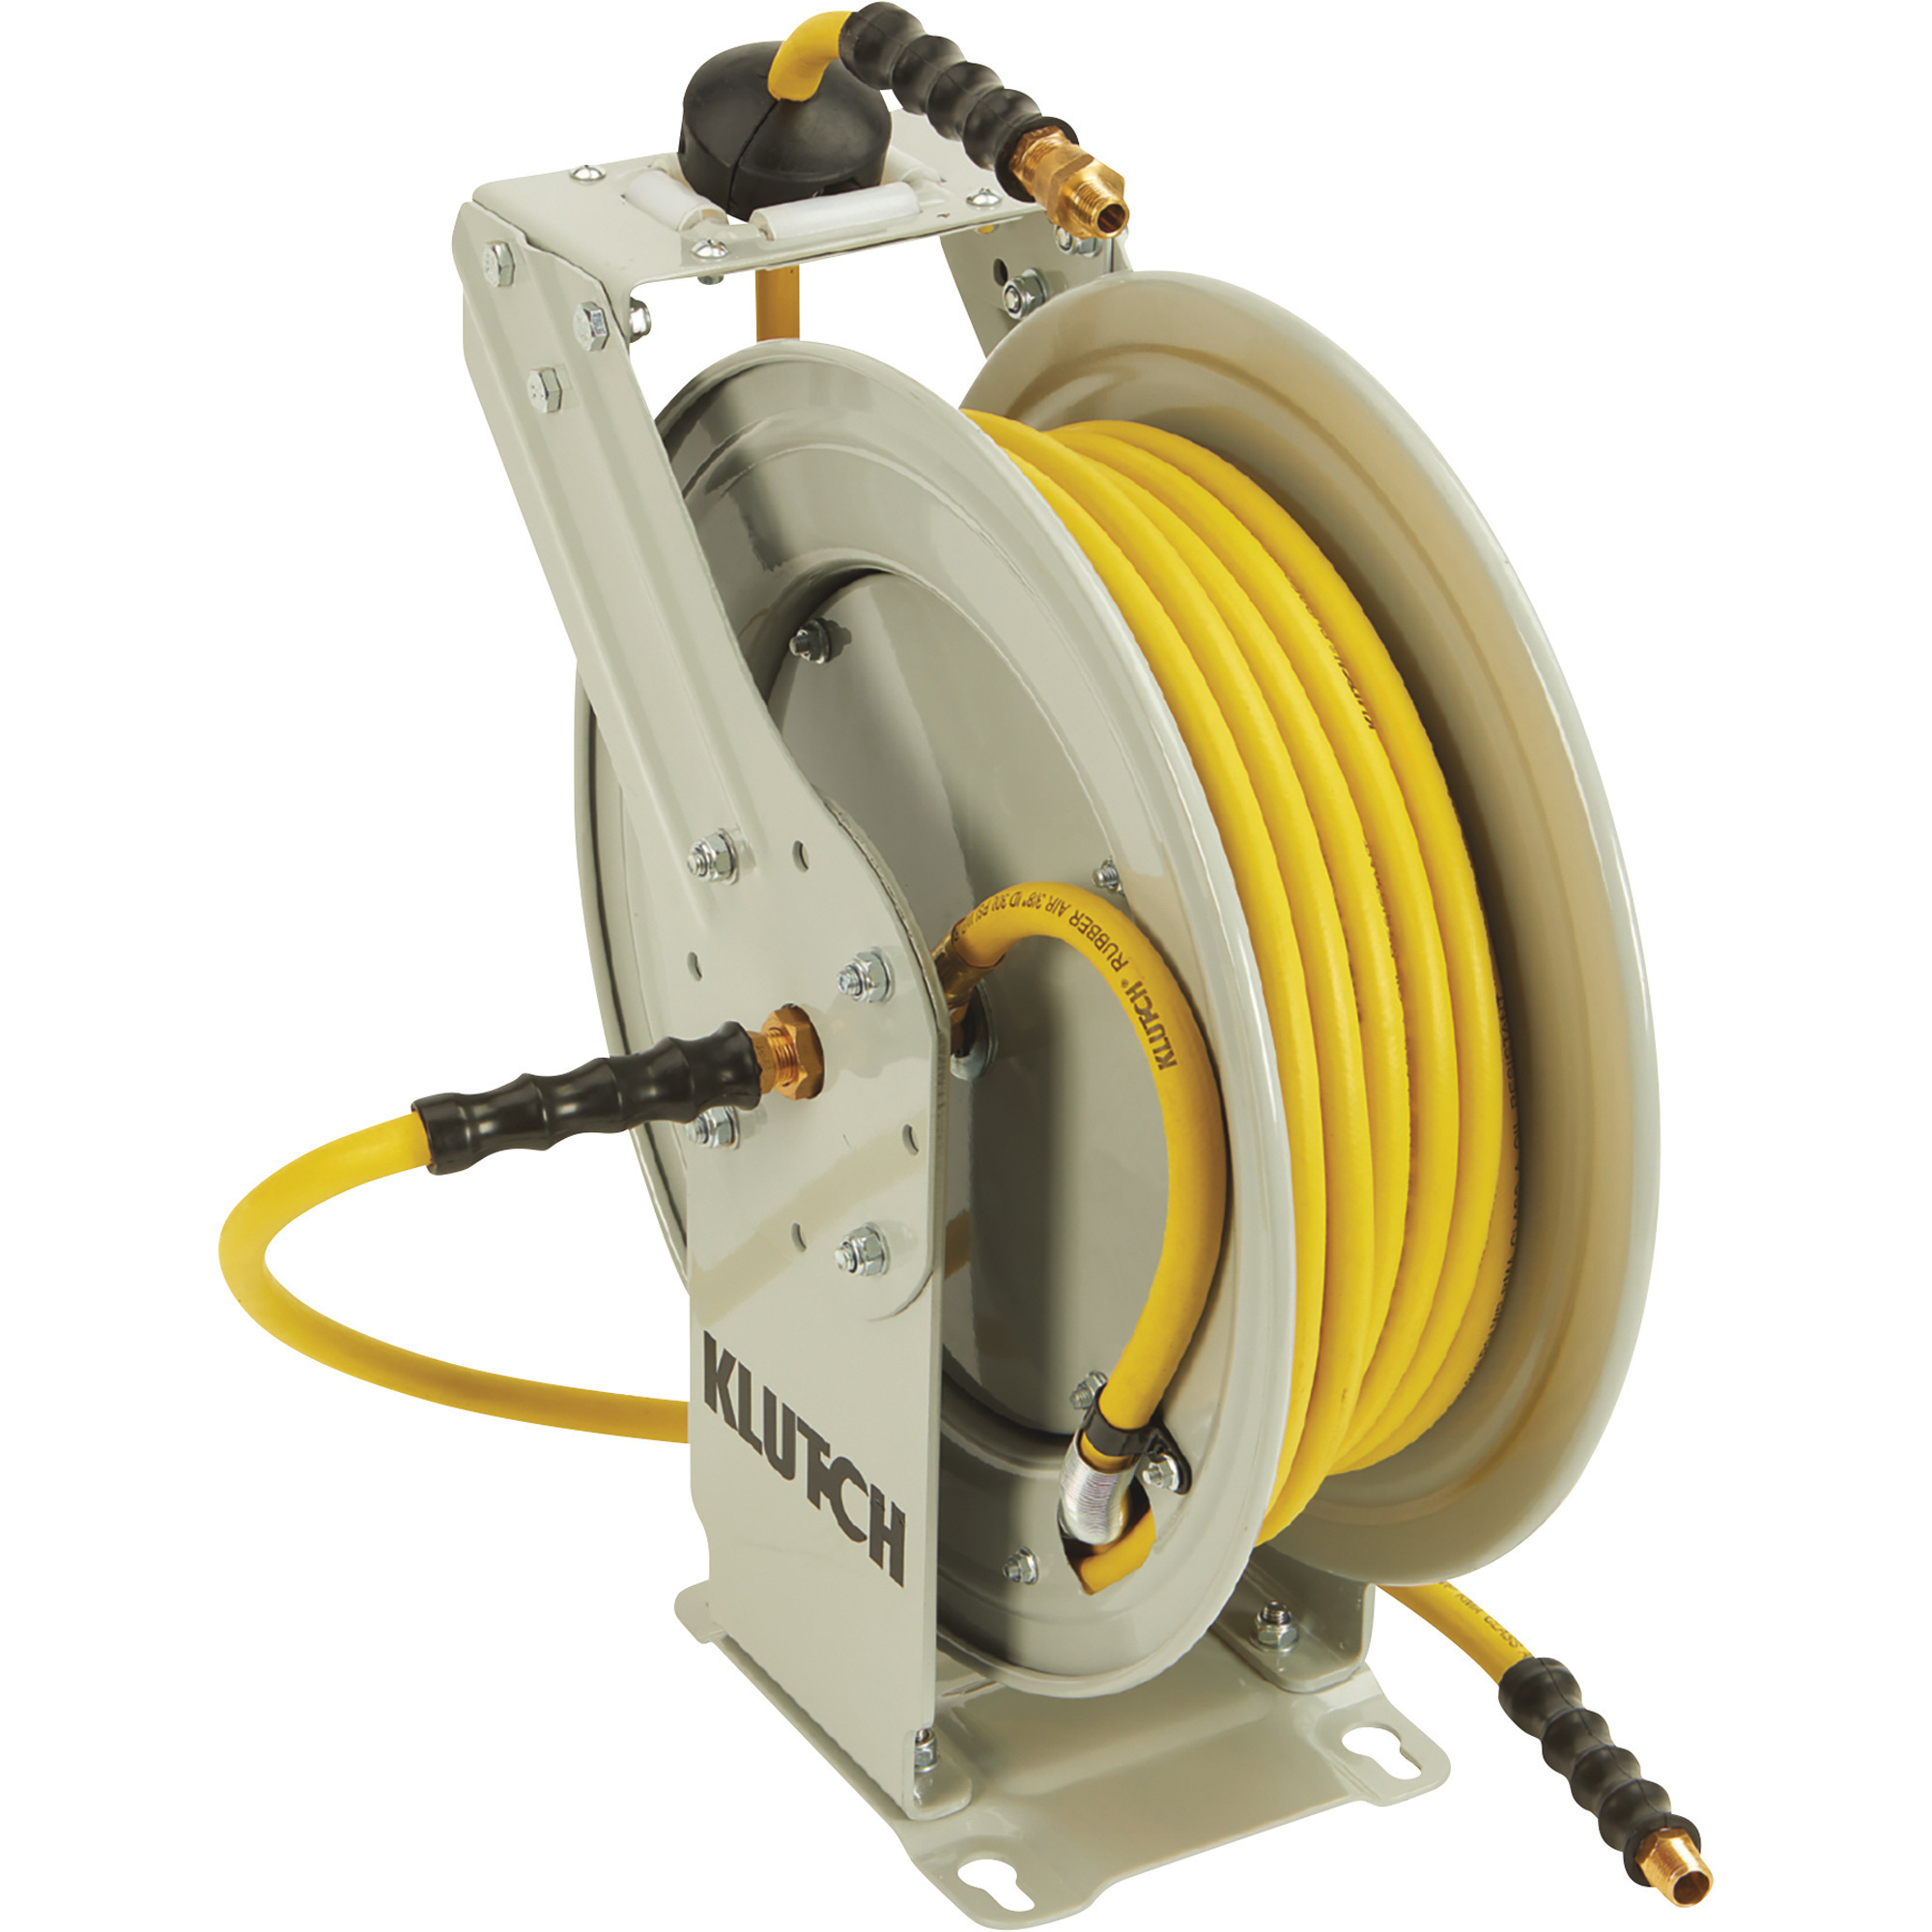 Klutch Auto-Rewind Air Hose Reel, with 1/2in.. x 100ft. Oil-Resistant  Rubber Hose, 300 PSI, Model# OSRDA12100-NT